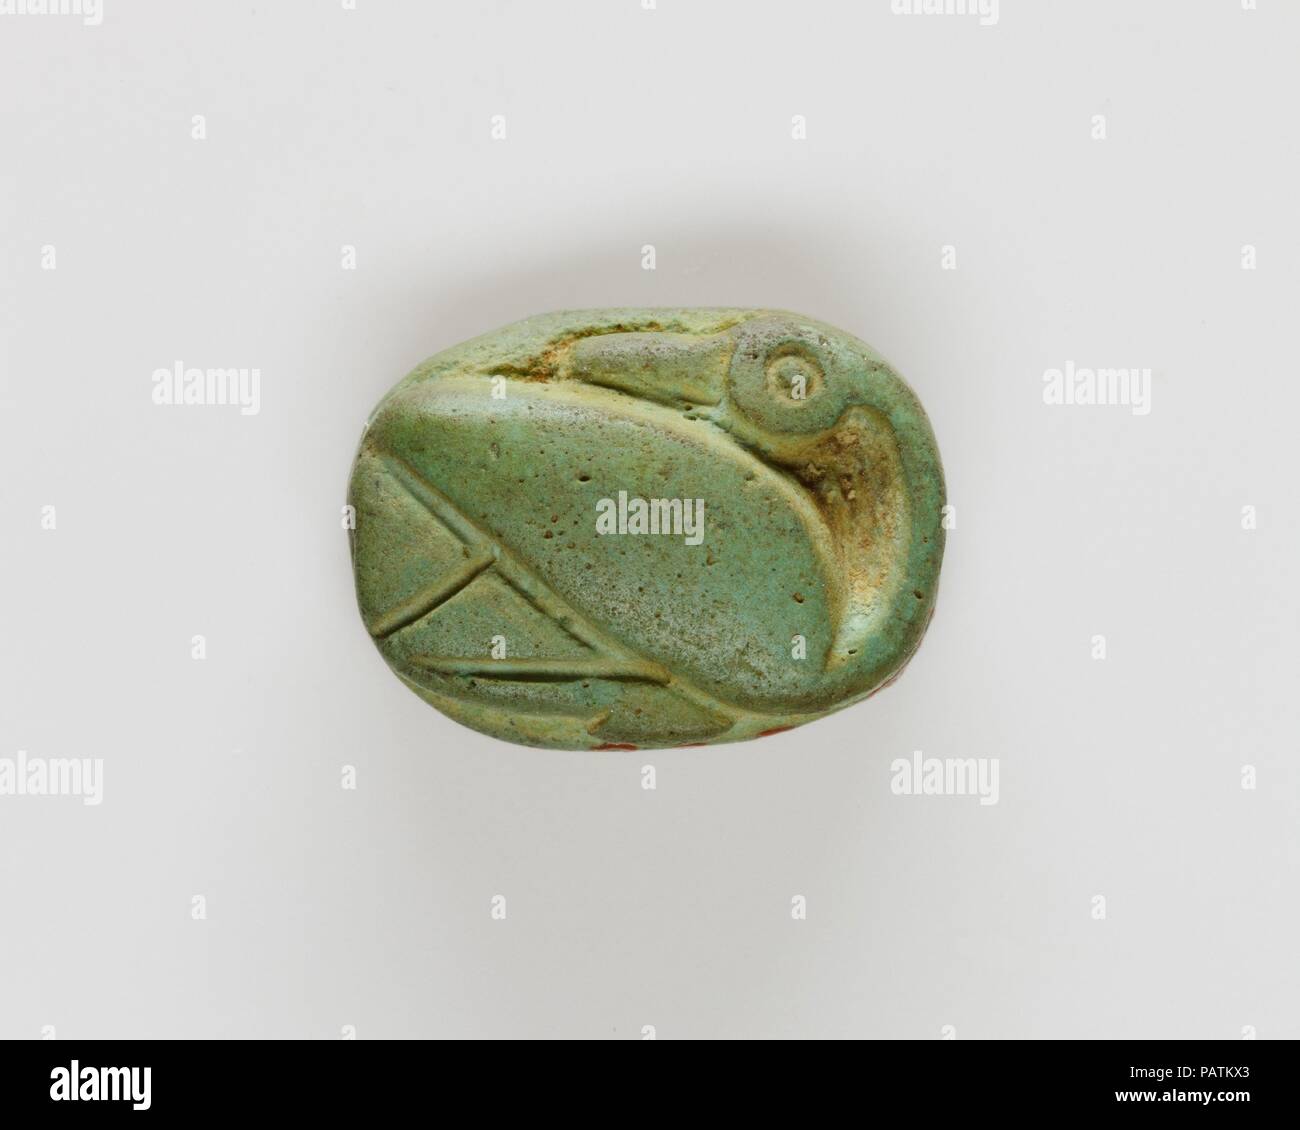 Plaque Decorated with a Duck. Dimensions: L. 1.2 cm (1/2 in.); W. 0.9 cm (3/8 in.); Th. 0.5 cm (3/16 in.). Dynasty: Dynasty 18, early. Reign: reign of Thutmose II-Early Joint reign. Date: ca. 1492-1473 B.C..  This seal-amulet was found with twenty-three scarabs and seal-amulets in the coffin of a young woman who was buried in Hatnefer's tomb (see 36.3.1 and 36.3 26). The back is carved in the shape of a duck carved  and the base is inscribed with a decorative floral pattern. Museum: Metropolitan Museum of Art, New York, USA. Stock Photo